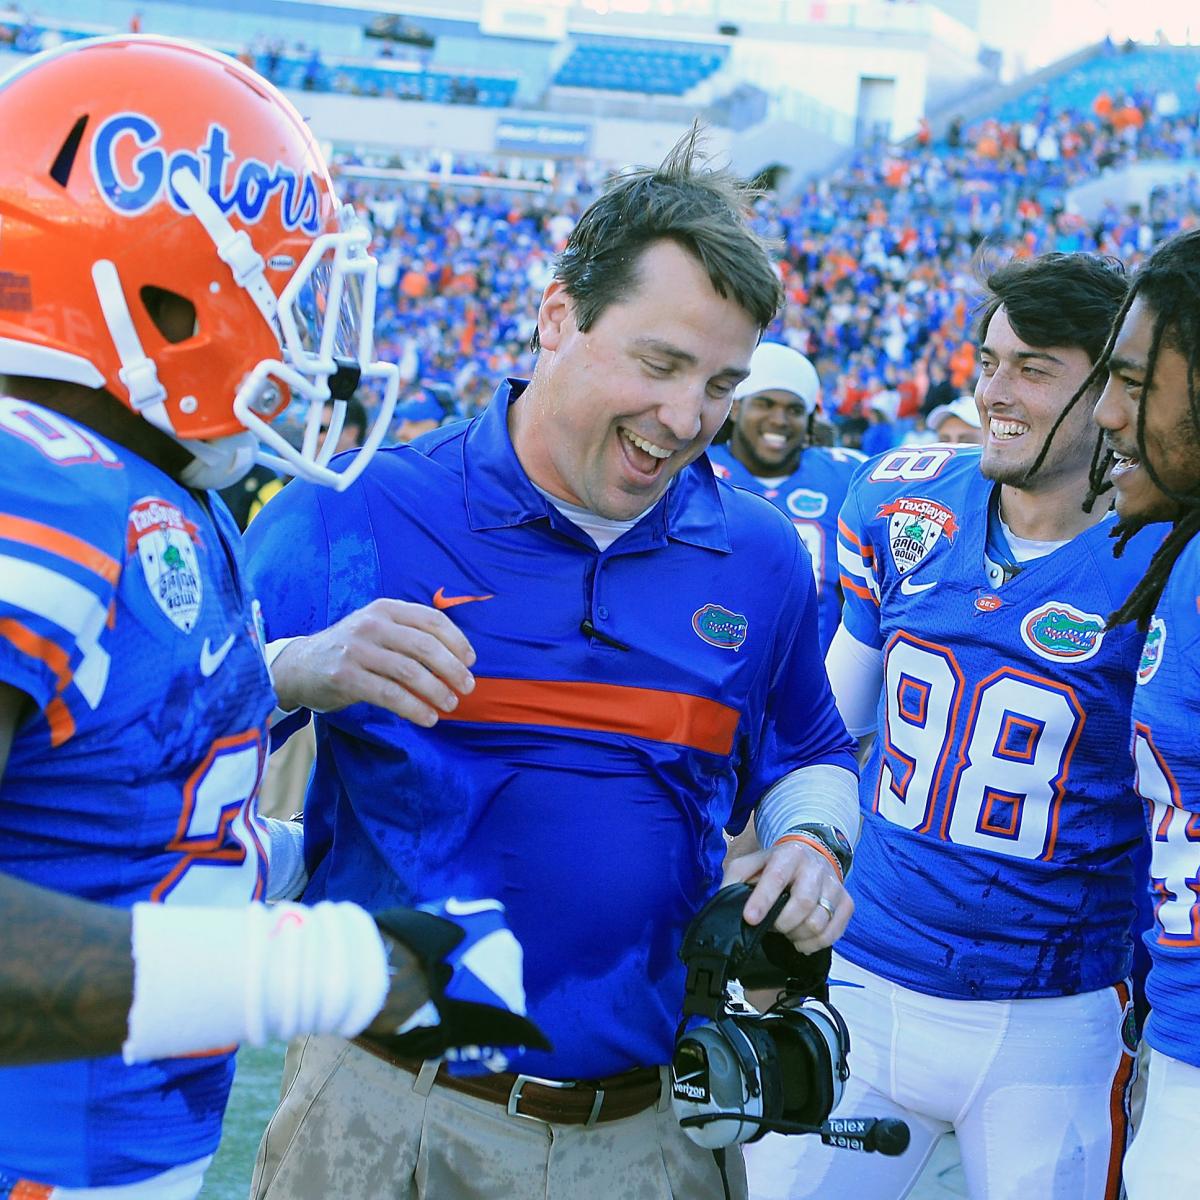 Florida Football Is Will Muschamp Redefining Gator Football in Record